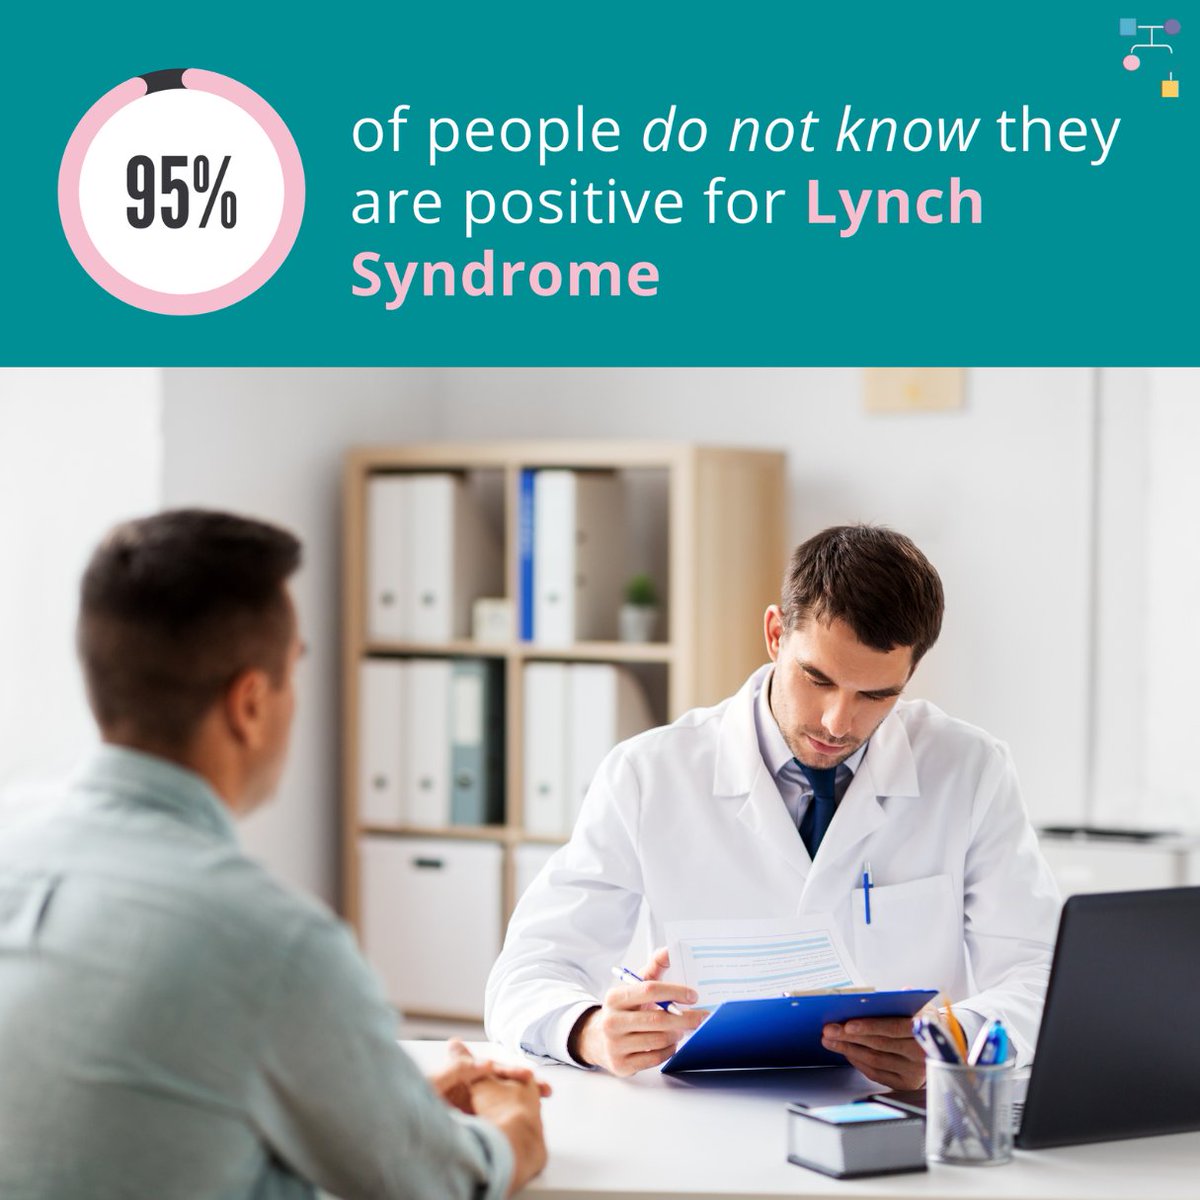 March 22nd is #𝗟𝘆𝗻𝗰𝗵𝗦𝘆𝗻𝗱𝗿𝗼𝗺𝗲𝗔𝘄𝗮𝗿𝗲𝗻𝗲𝘀𝘀𝗗𝗮𝘆! Lynch Syndrome is due to inherited mutations in #MLH1, #MSH2, #MSH6, #PMS2, and #EPCAM. Did you know that 1 in 279 individuals have #LynchSyndrome, yet only 5% know they are positive for #LynchSyndrome?